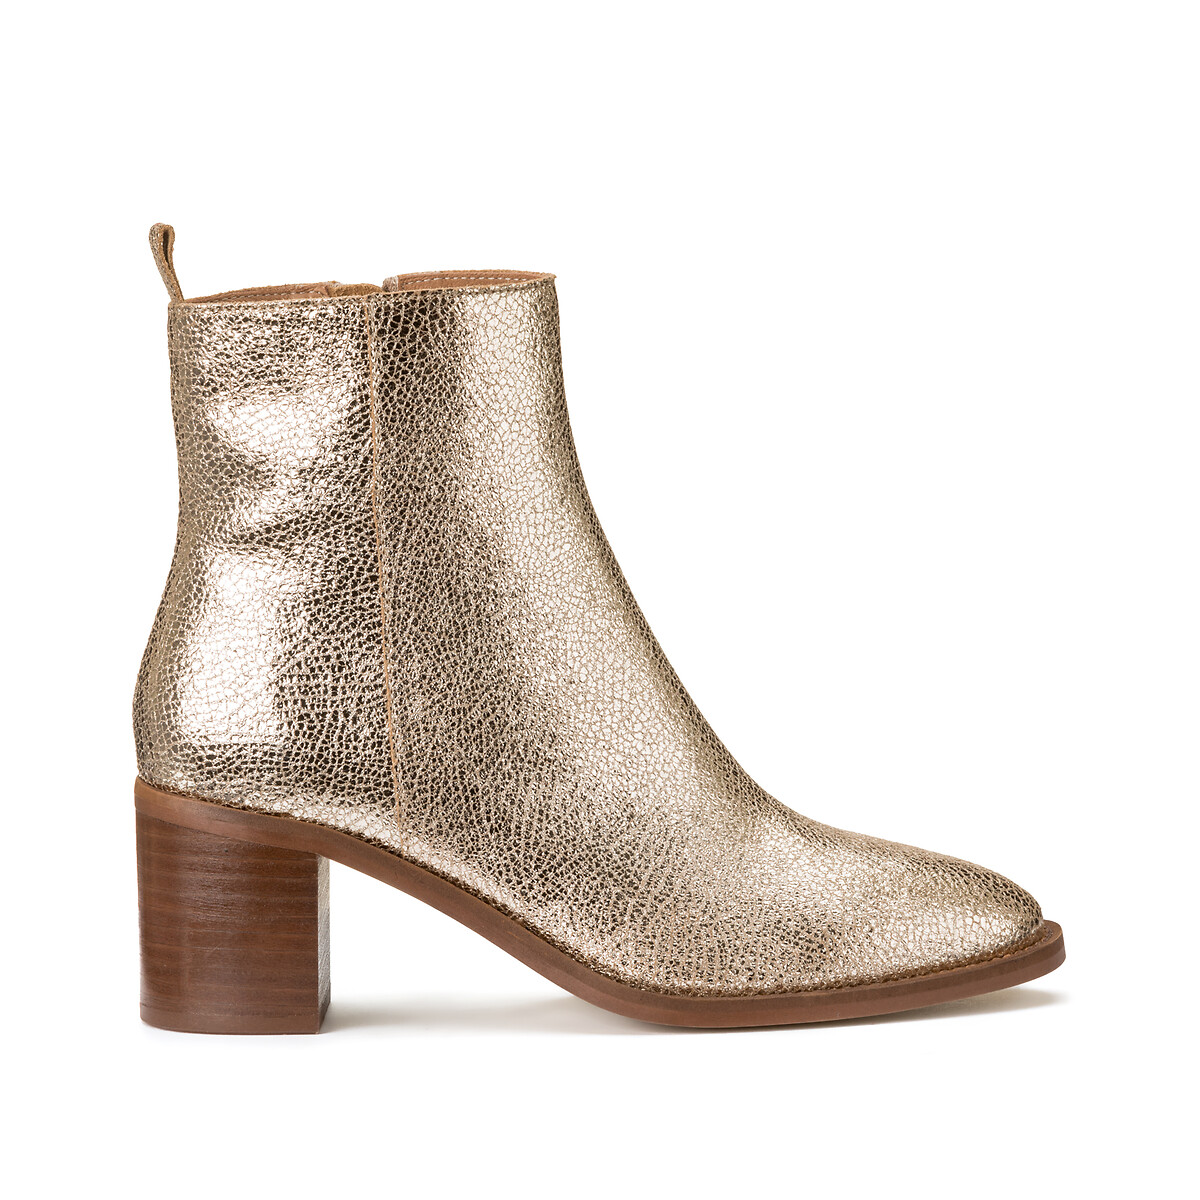 Metallic leather ankle boots with block heel , gold-coloured, La ...